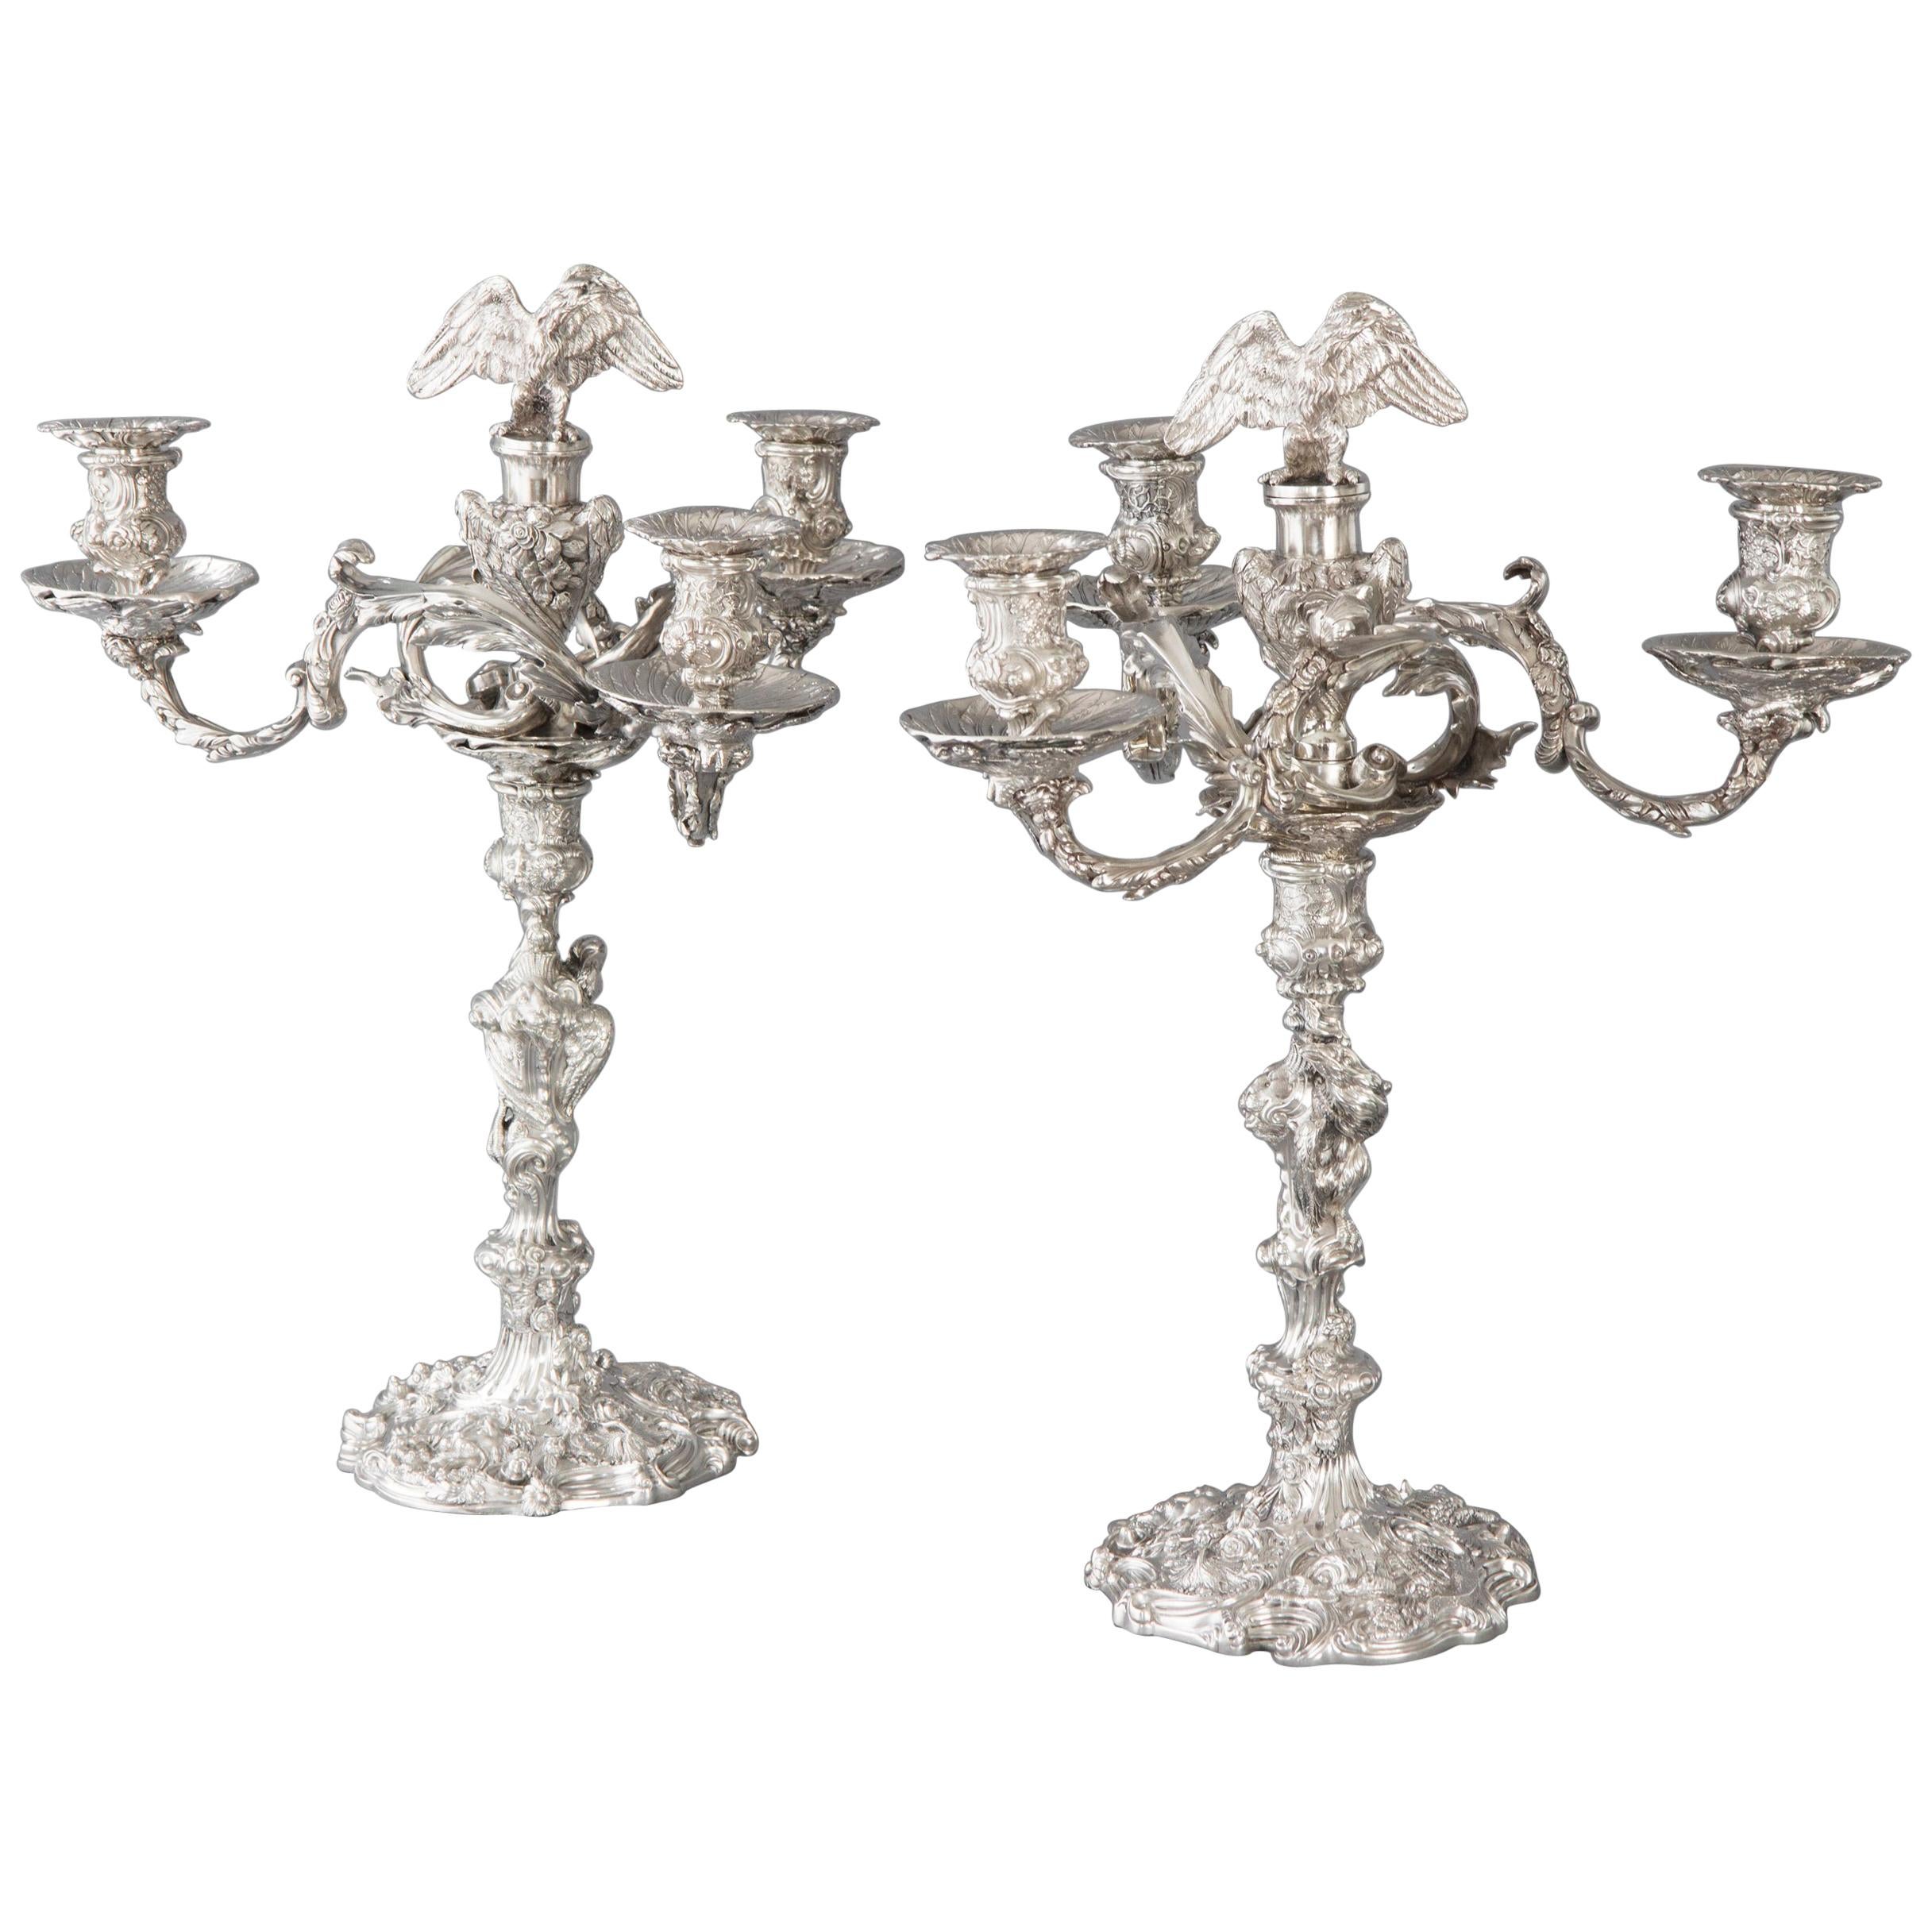 Impressive Pair of Cast Silver Four-Light Candelabra, London 1812 by W Pitts